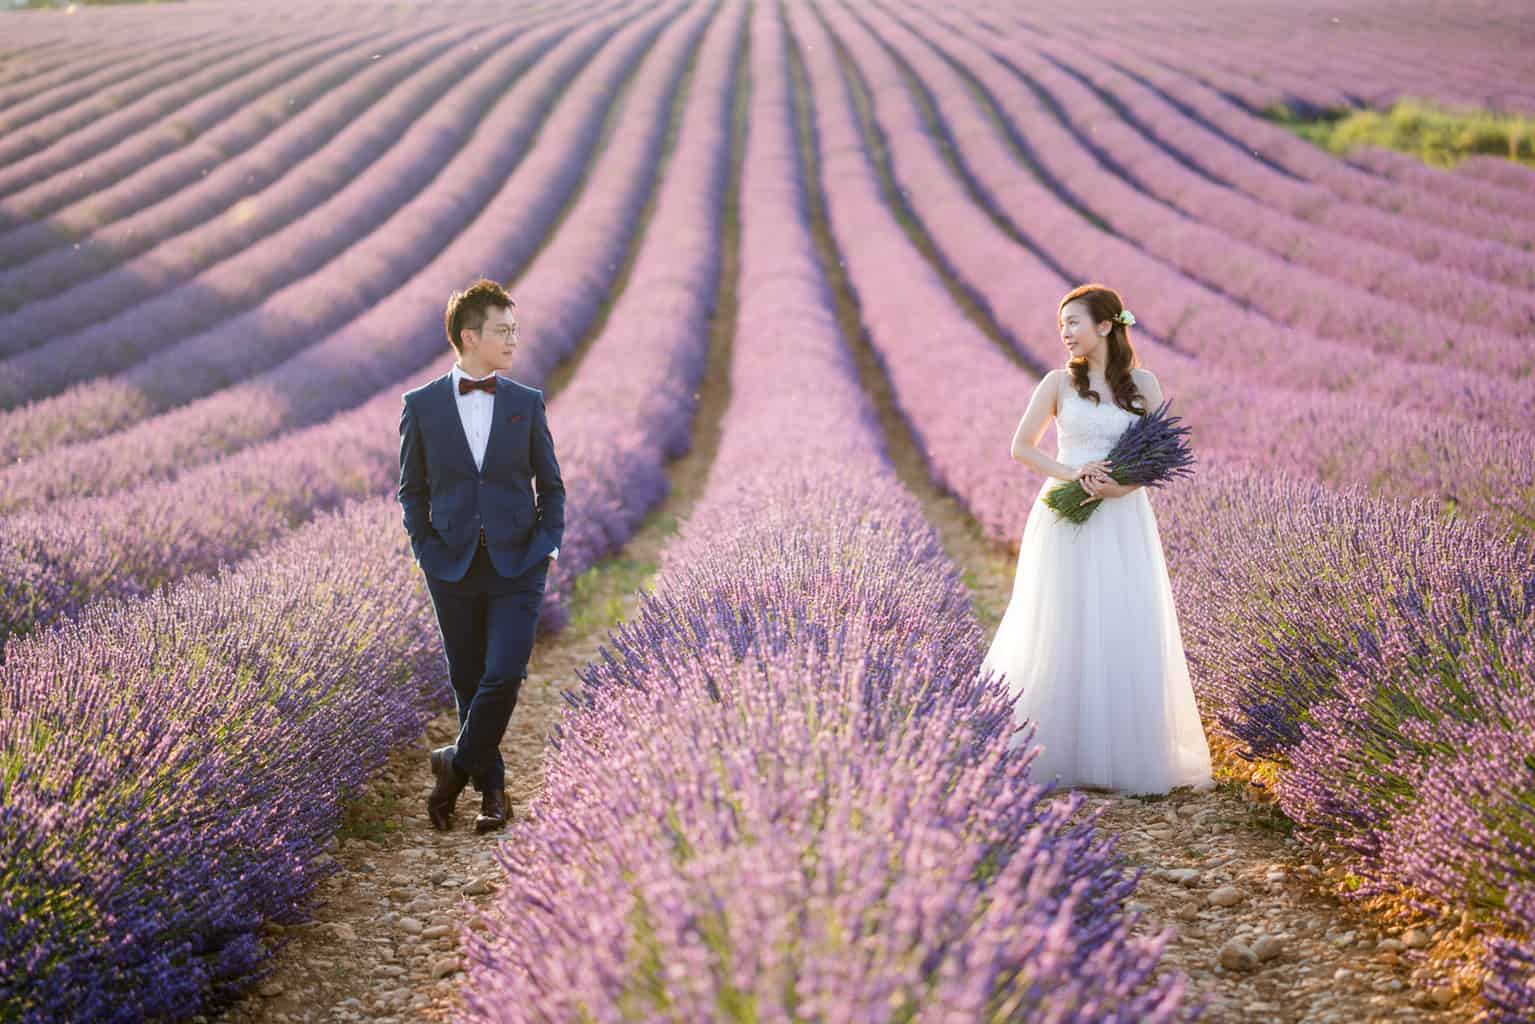 Intimate Wedding Ceremony In The Lavender Fields 365